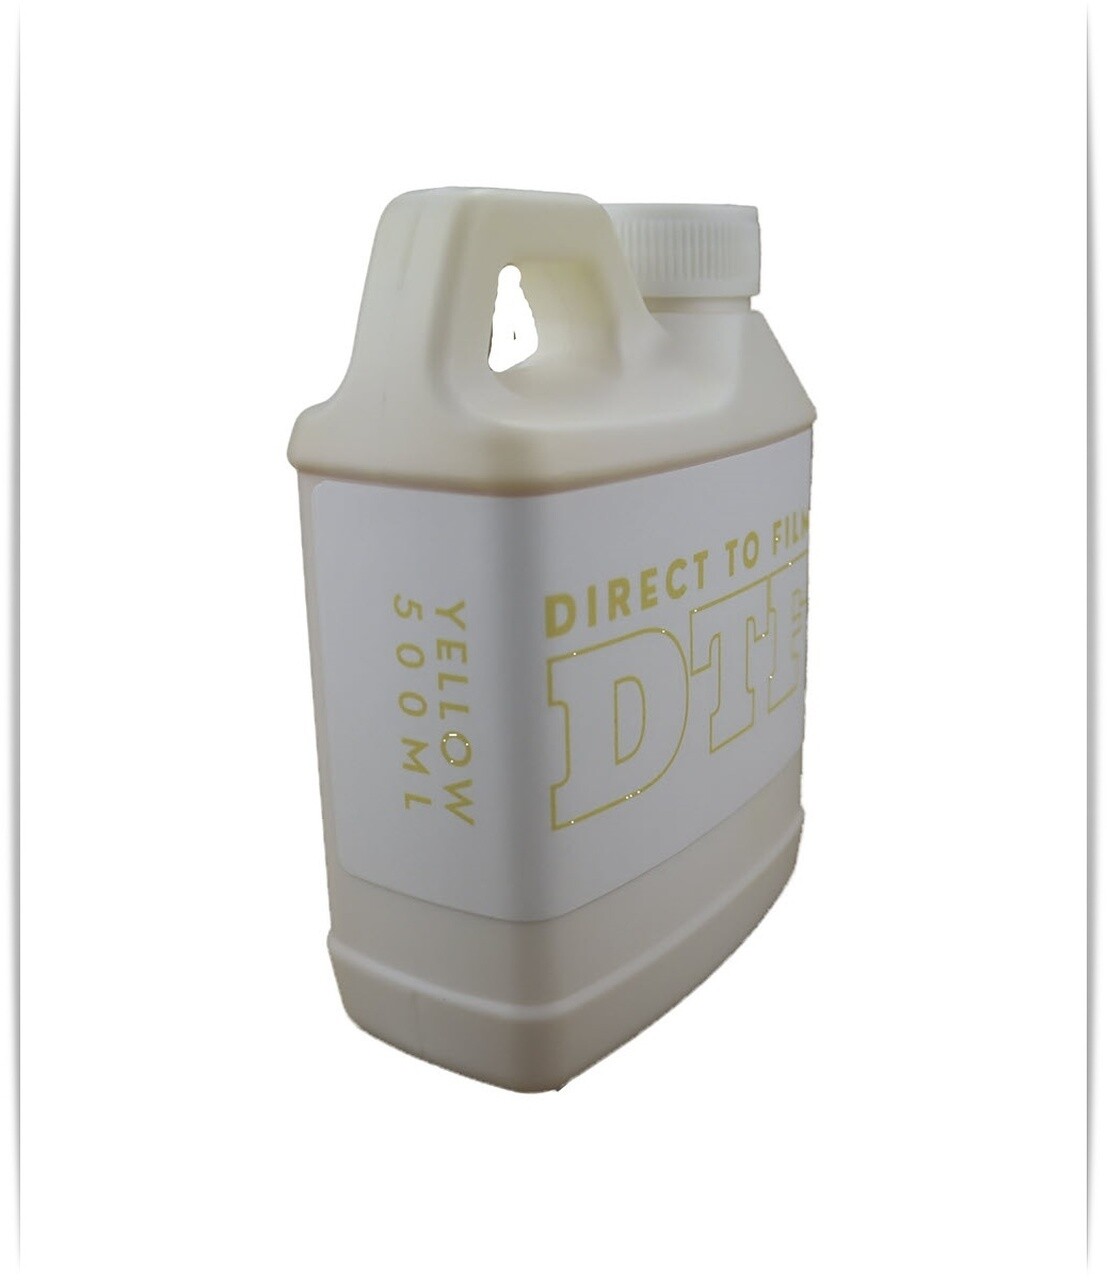 Yellow DTF Ink Direct To Film 500ml Bottle for Epson, Epson Print Head printers